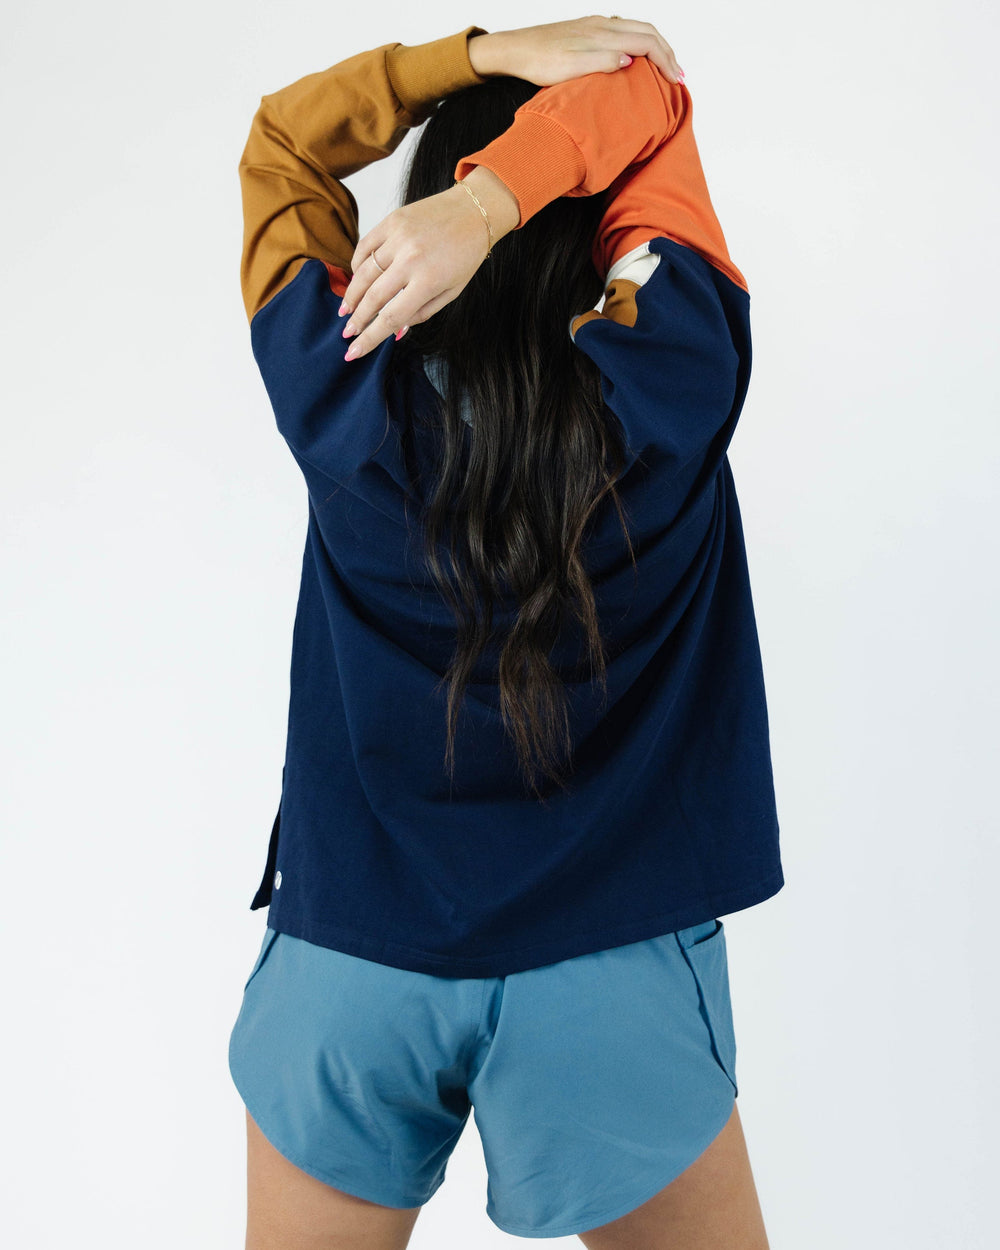 A women modeling a blue, orange, yellow and white color blocked crewneck.